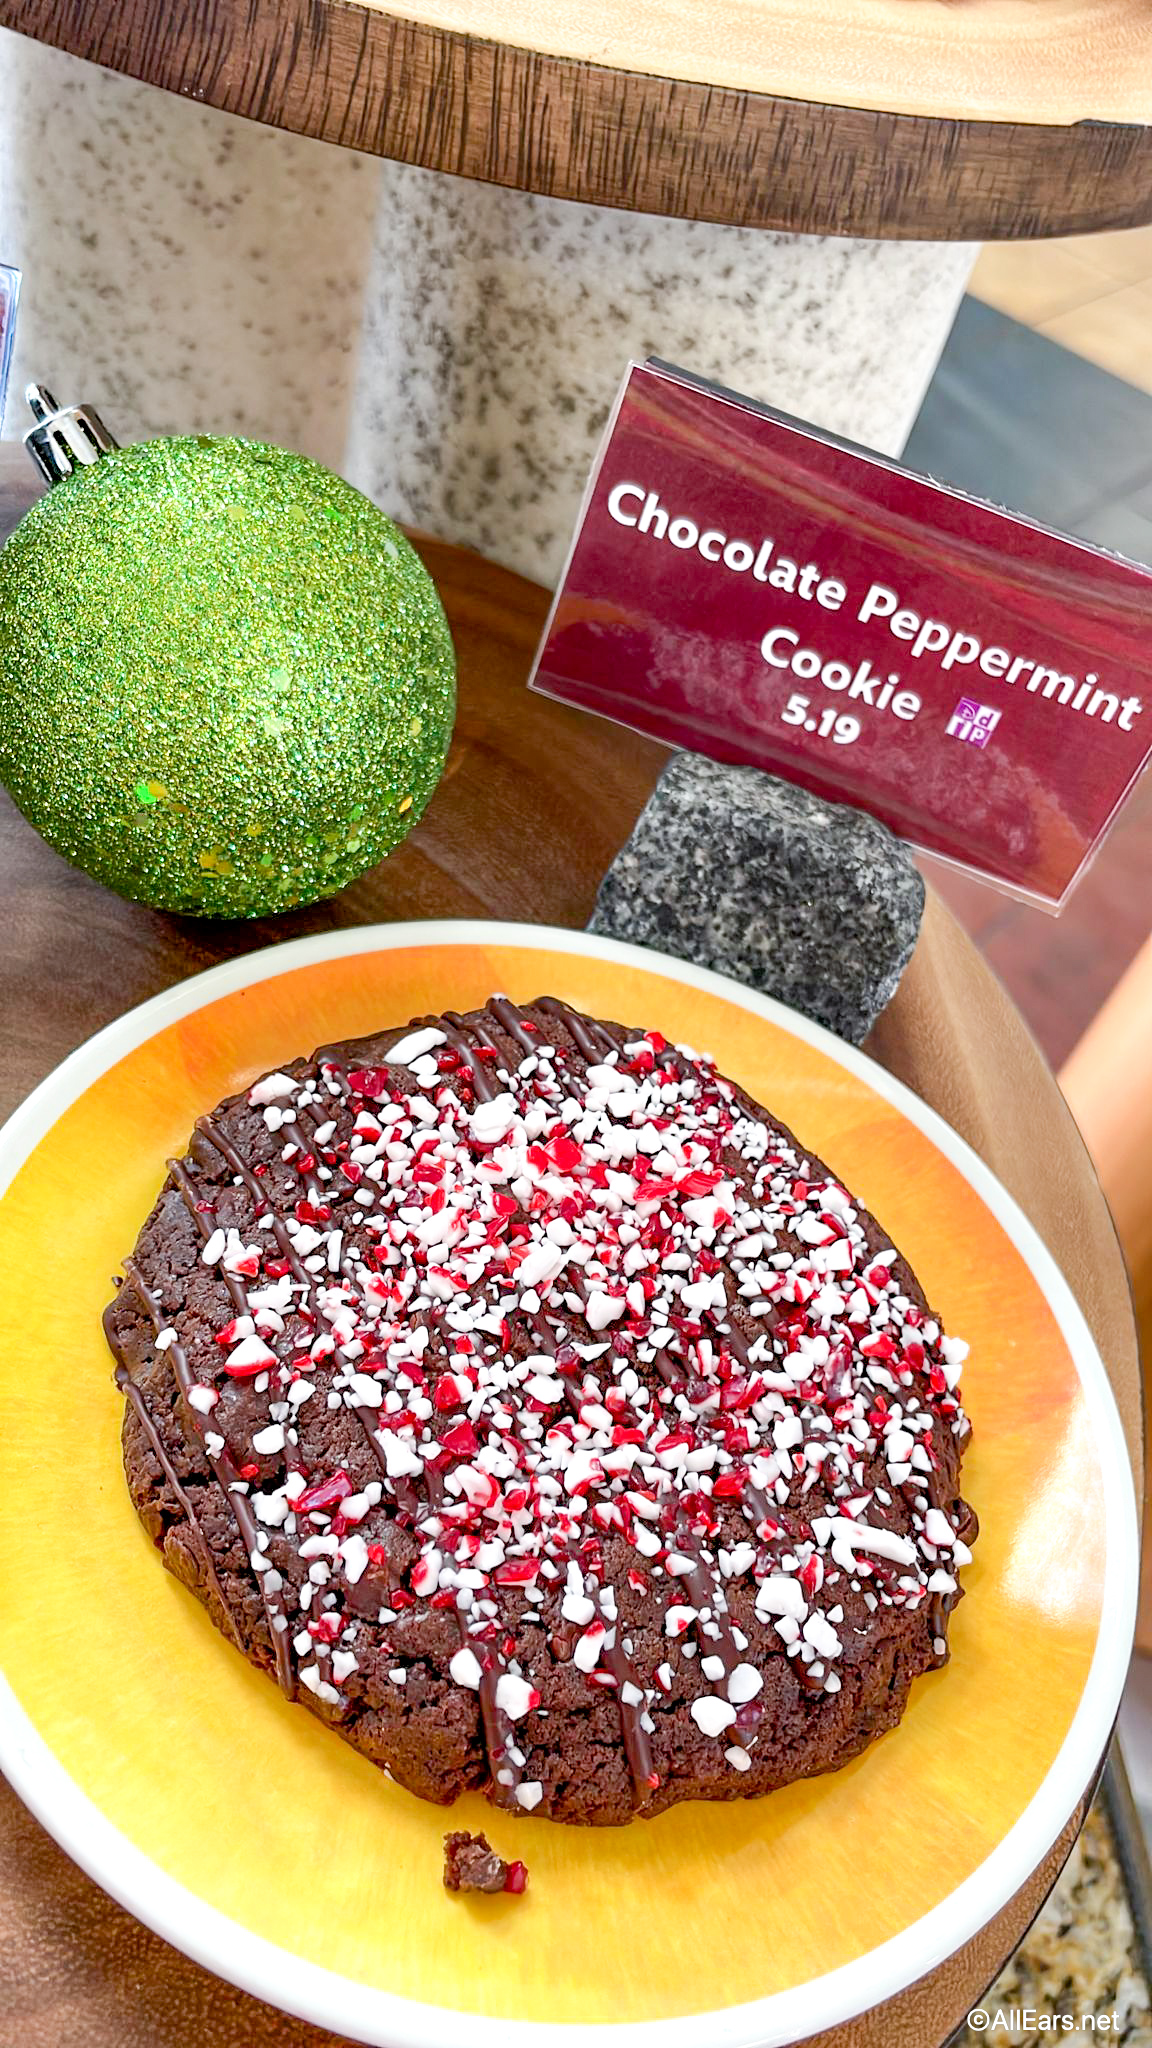 Chocolate Peppermint Cookie